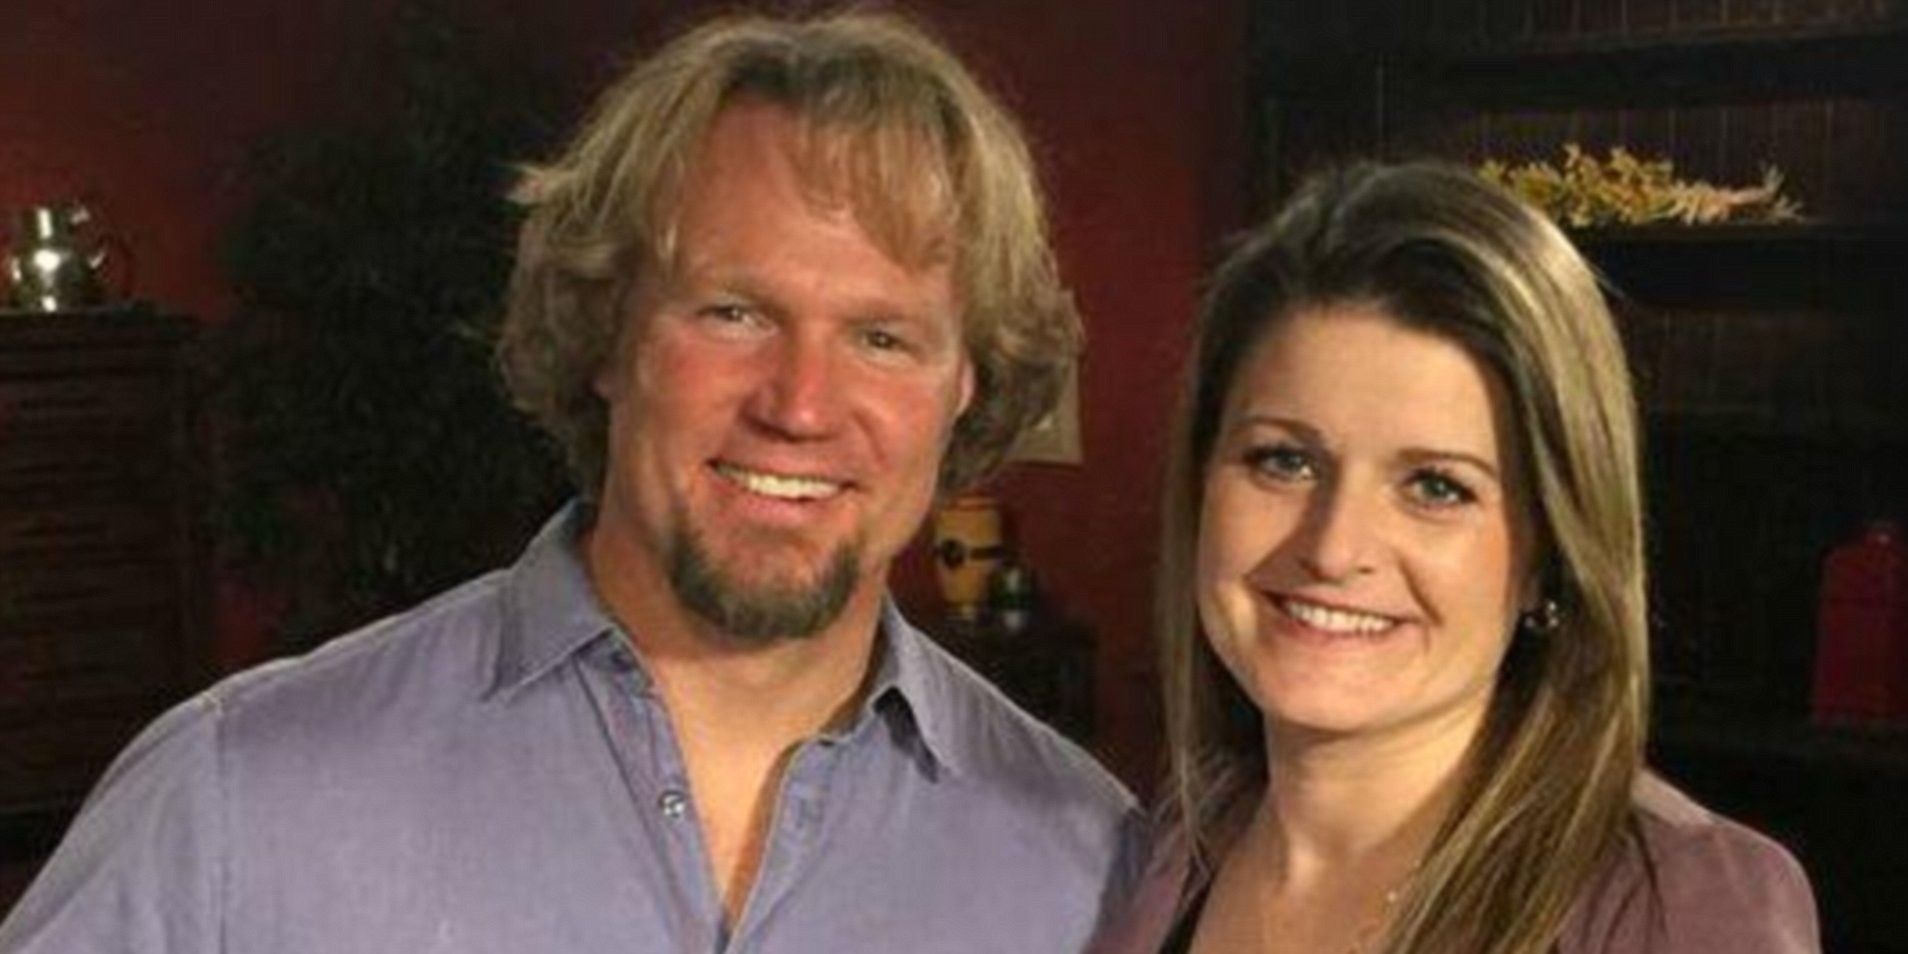 Kody and Robyn Brown from Sister Wives